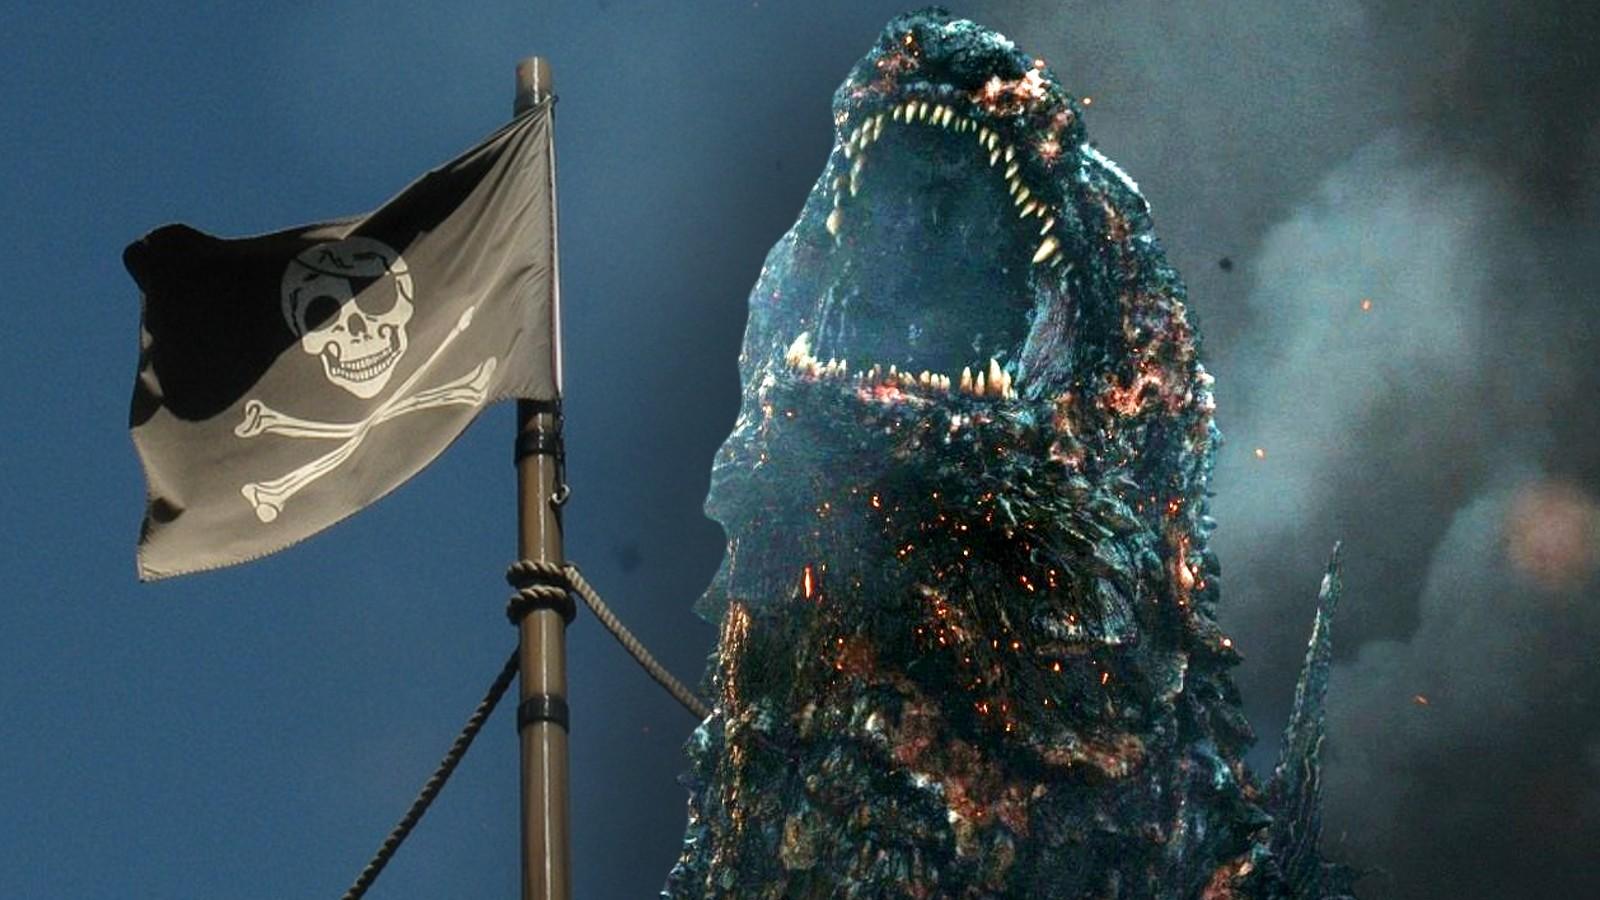 A pirate flag and Godzilla in Minus One